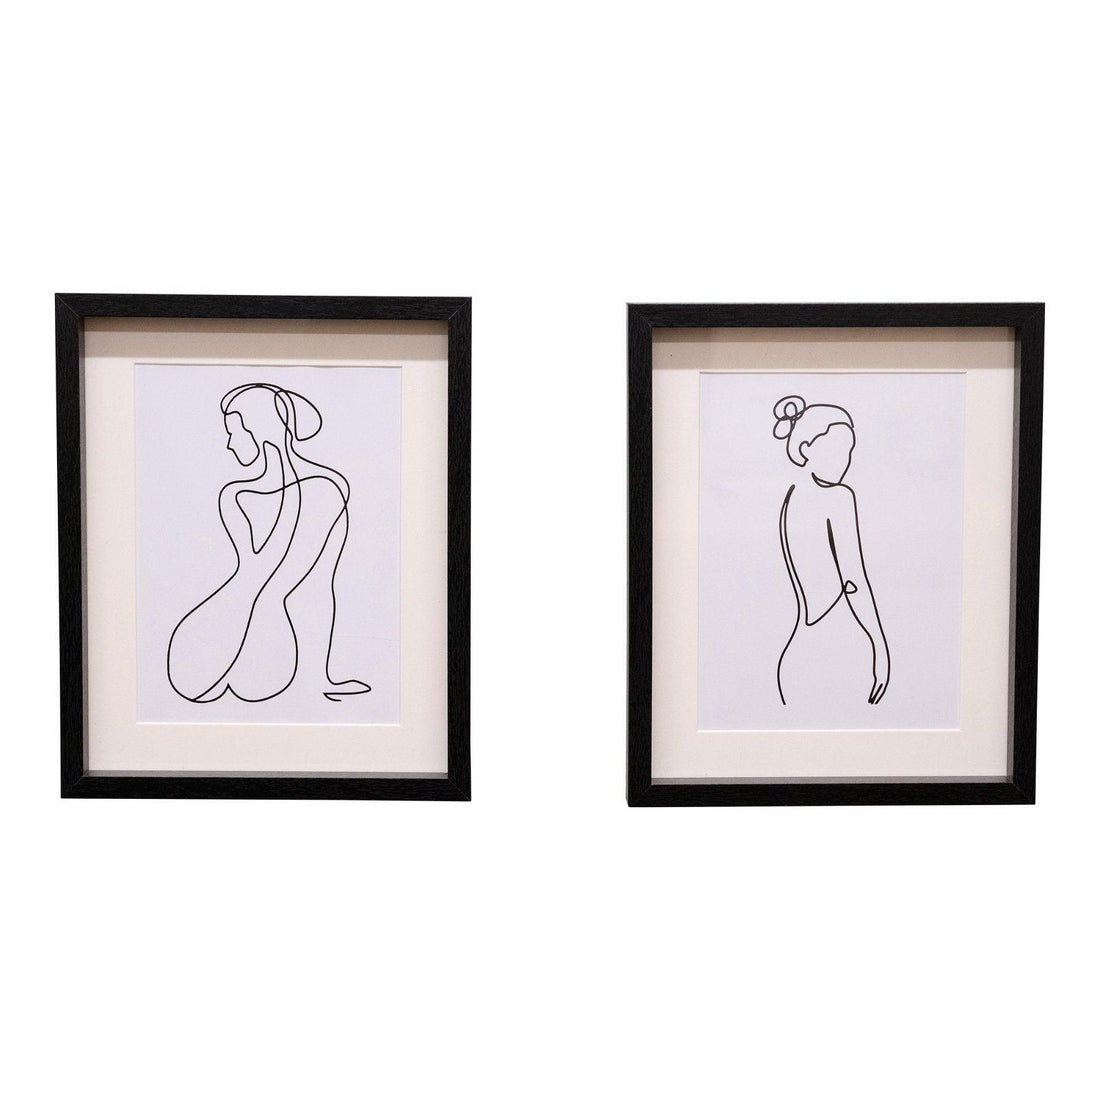 Set of 2 Black Framed Prints of Silhouettes - £20.99 - Pictures 